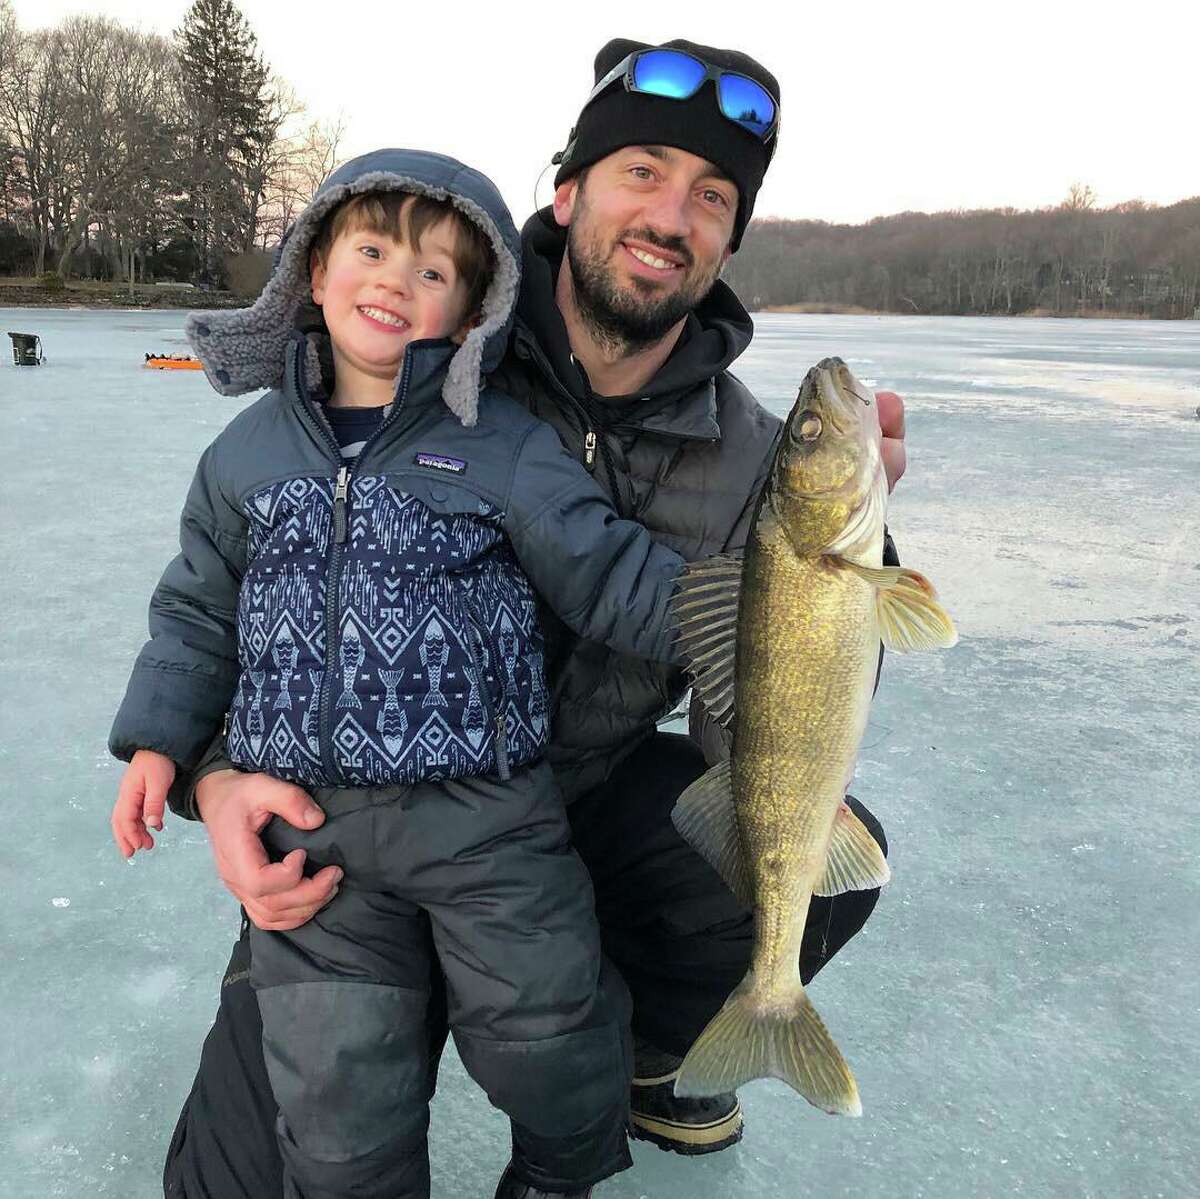 Justin Wiggins and his son, Quinn, show off a keeper walleye last February while enjoying ice fishing at Coventry Lake. Wiggins coordinates the fishing education program for Connecticut’s Department of Energy and Environmental Protection. “I went over to investigate and she had one leg down through the ice and the other bent behind her (stuck and nowhere to go as she stepped in someone else’s hole from a previous outing). I lifted her out and drove home, 1 mile, we were only on the ice about 20 minutes. It was not a deterrent and she still loves to go.” Ice fishing can be lots of fun, but if you’ve never gone before there’s some things you should know. Beauchene, a supervising fisheries biologist with the state’s Department of Energy and Environmental Protection, shared some tips via email. “Ice fishing involves walking and drilling holes as you go, so you generally know what the thickness is,” he said. “There’s not a lot of monitoring that goes on, unless it’s a place designated and used by a town for skating or such."